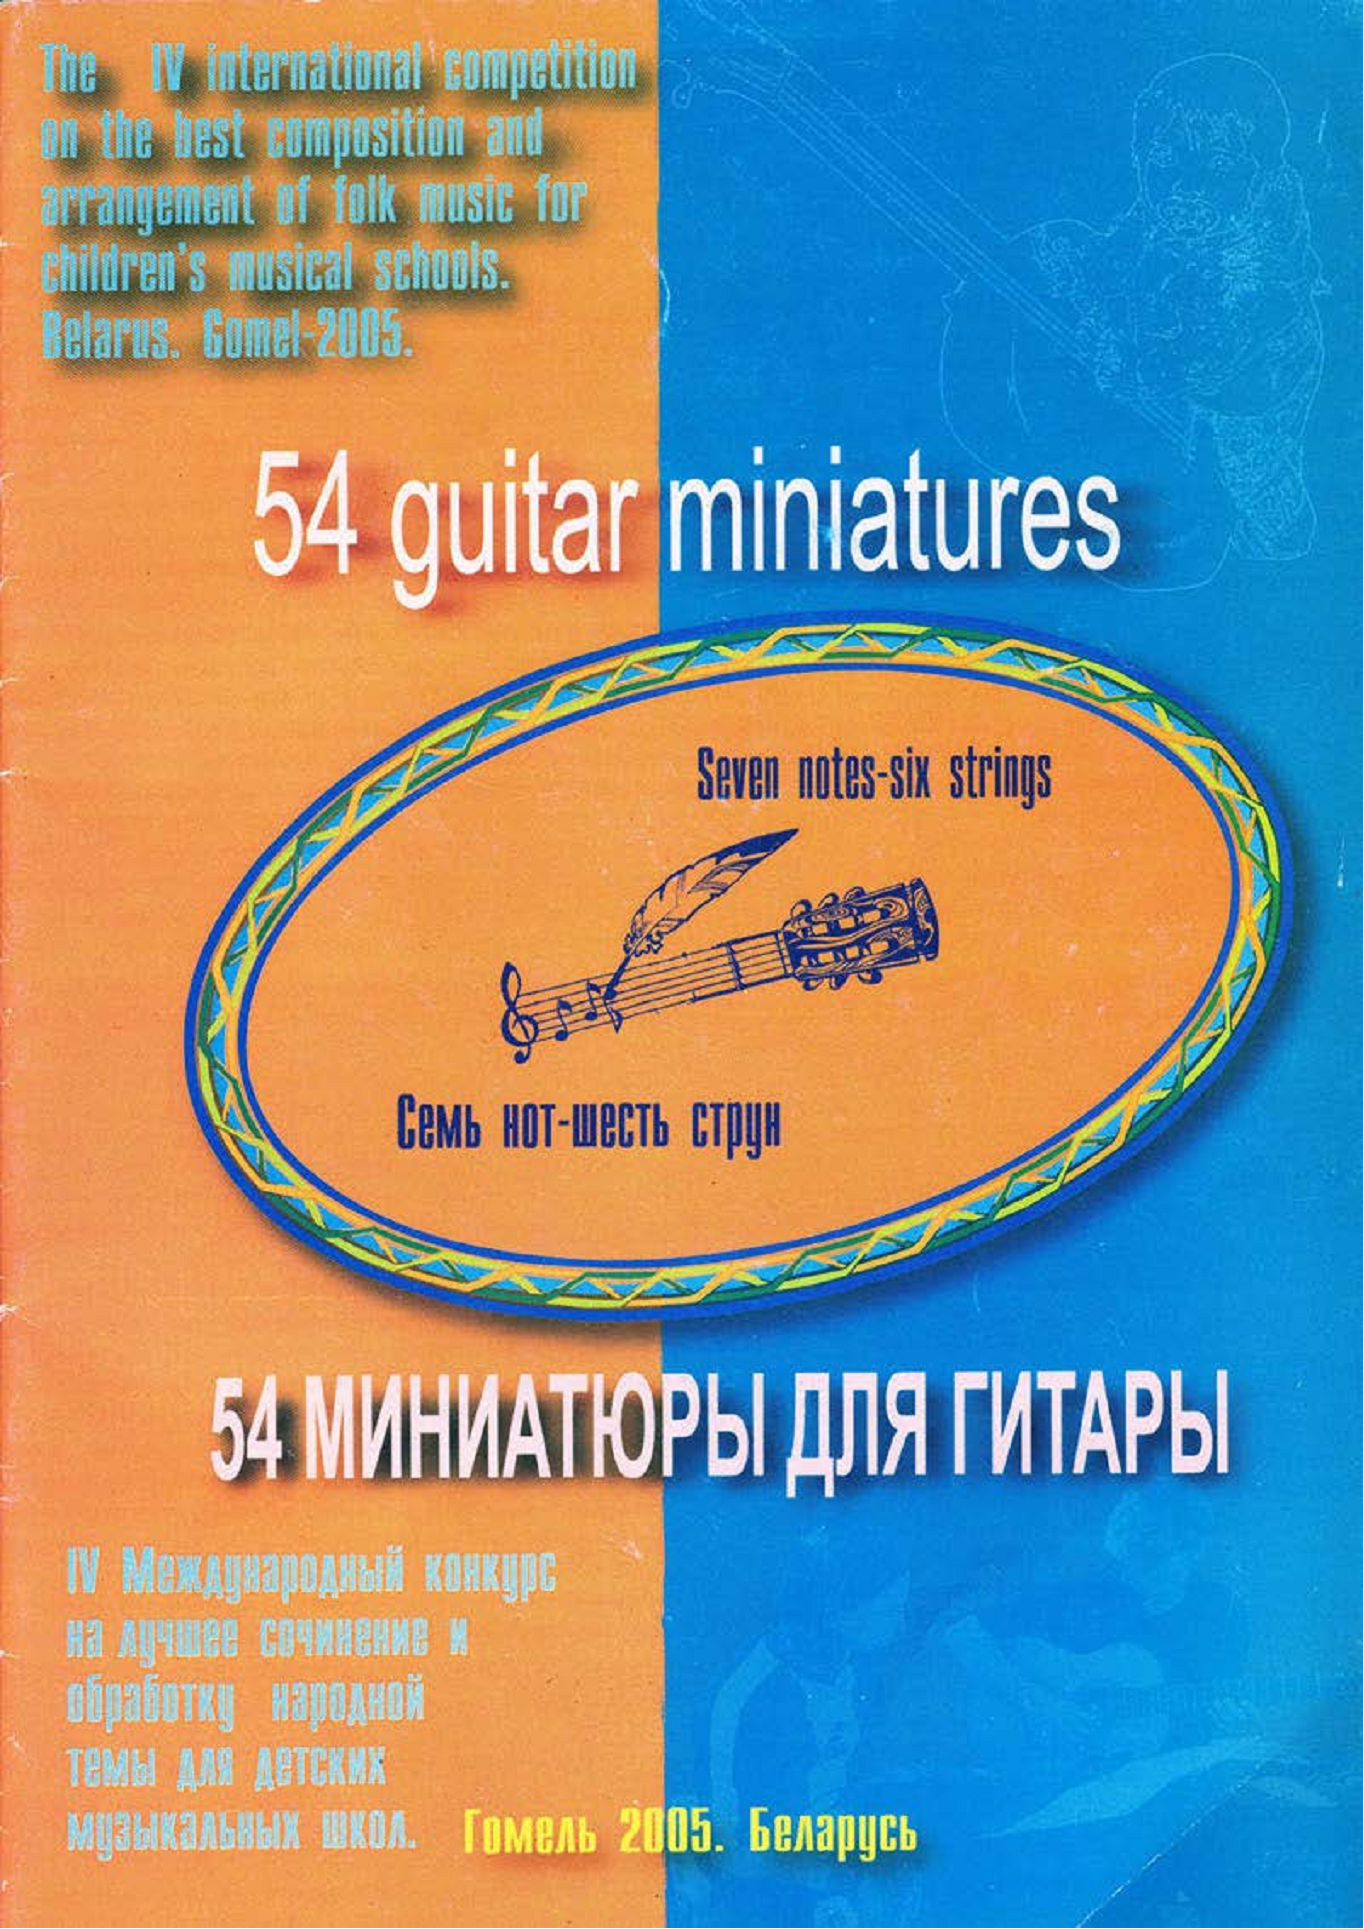 "54 miniatures for guitar" for music schools